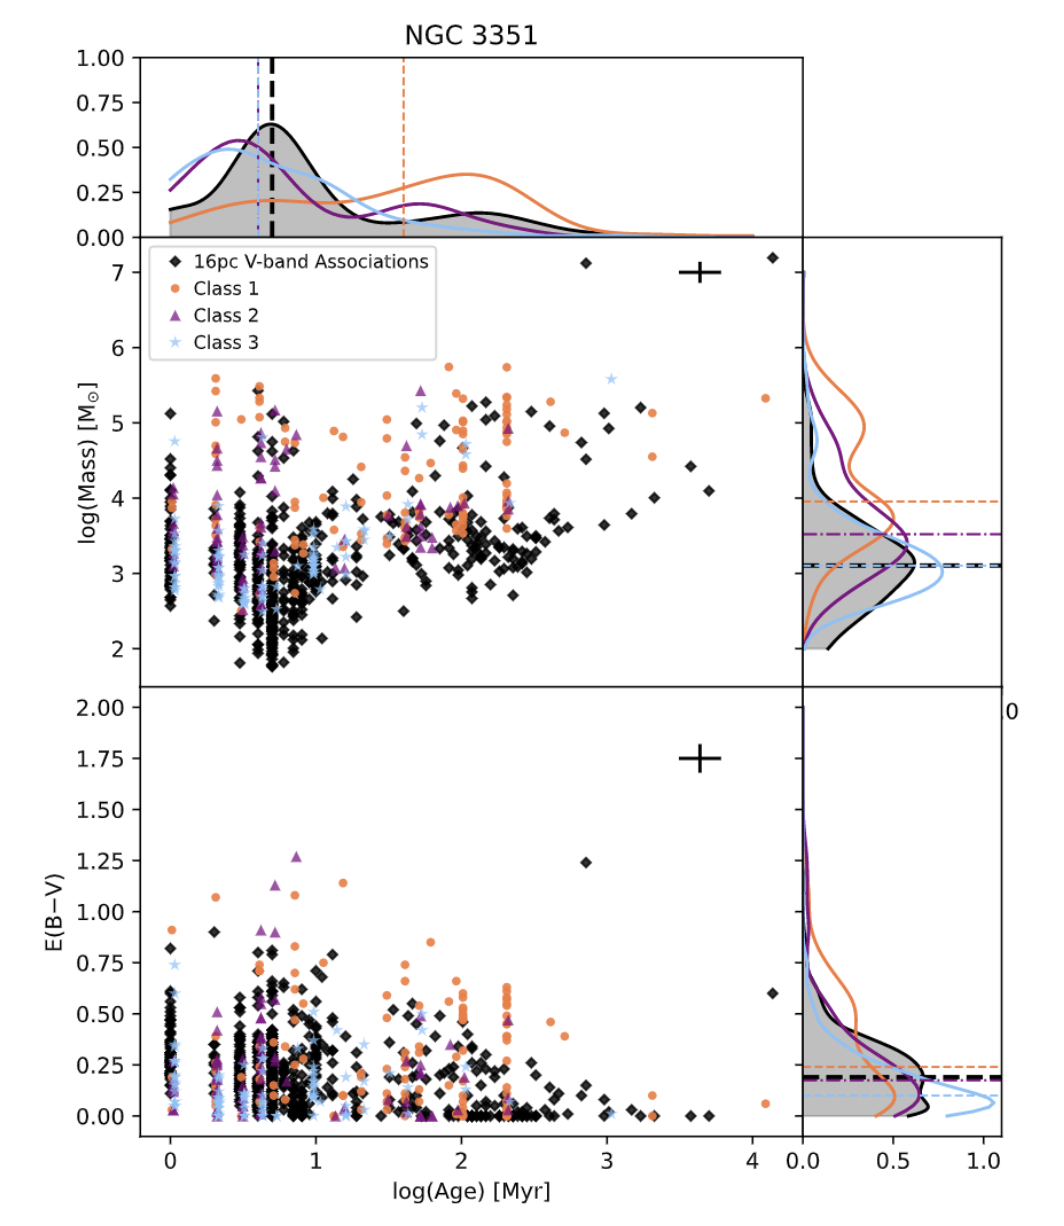 Plots showing age-mass and age-reddening for NGC 3351 compared to associations of Class 1/2/3 sources.